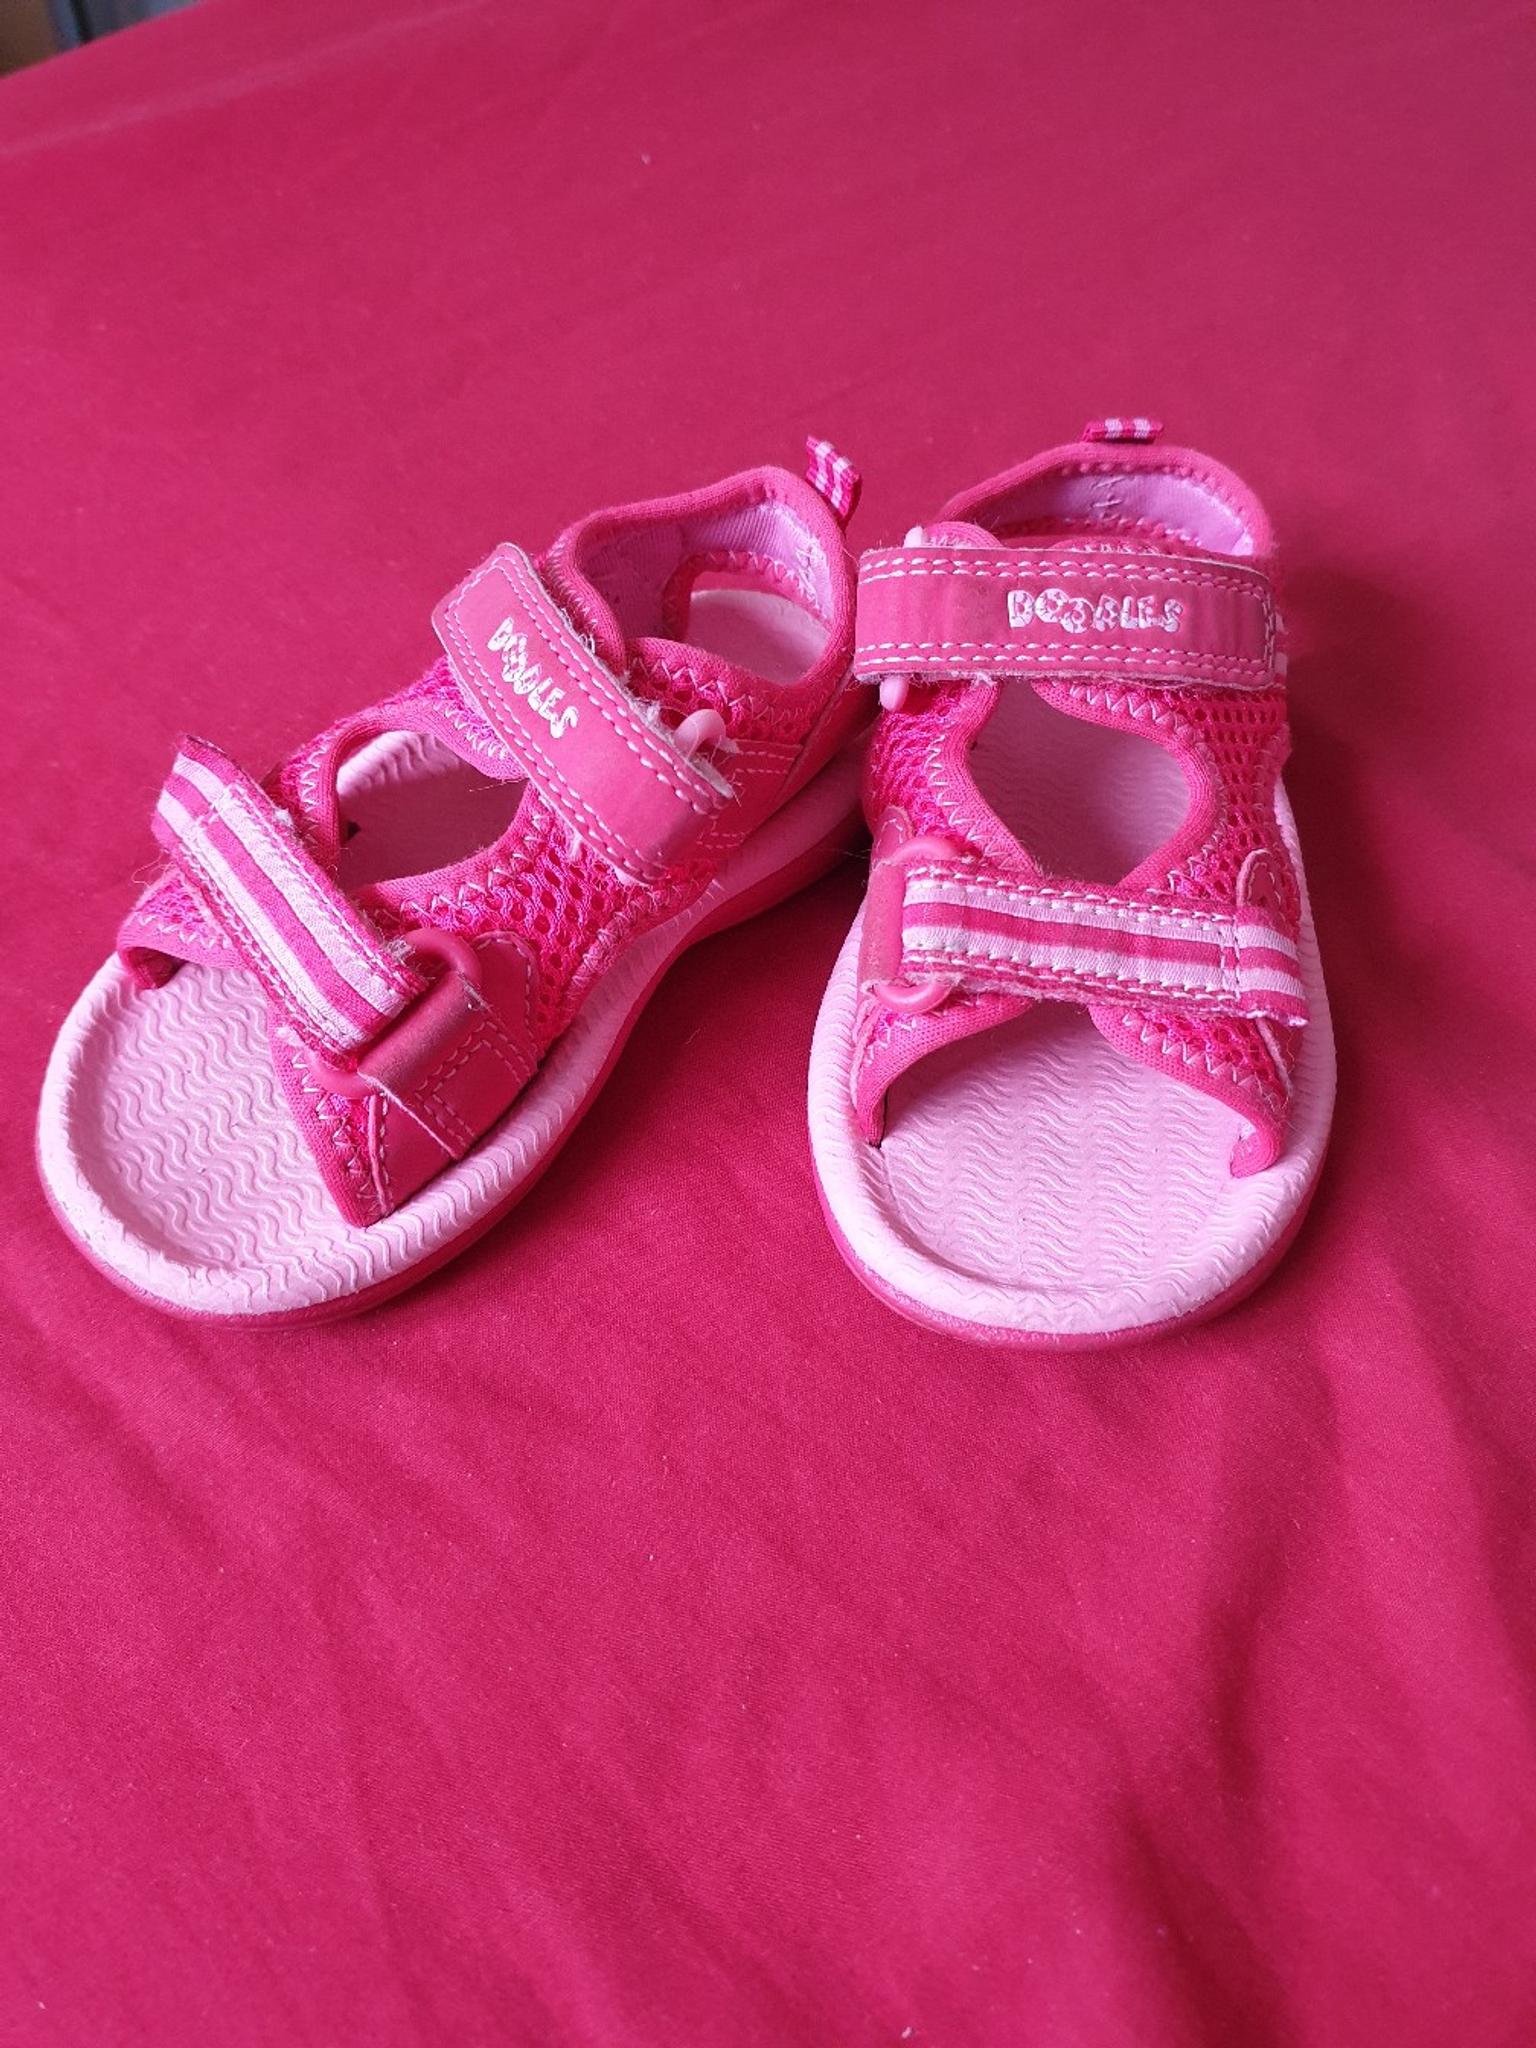 clarks size 4 baby shoes